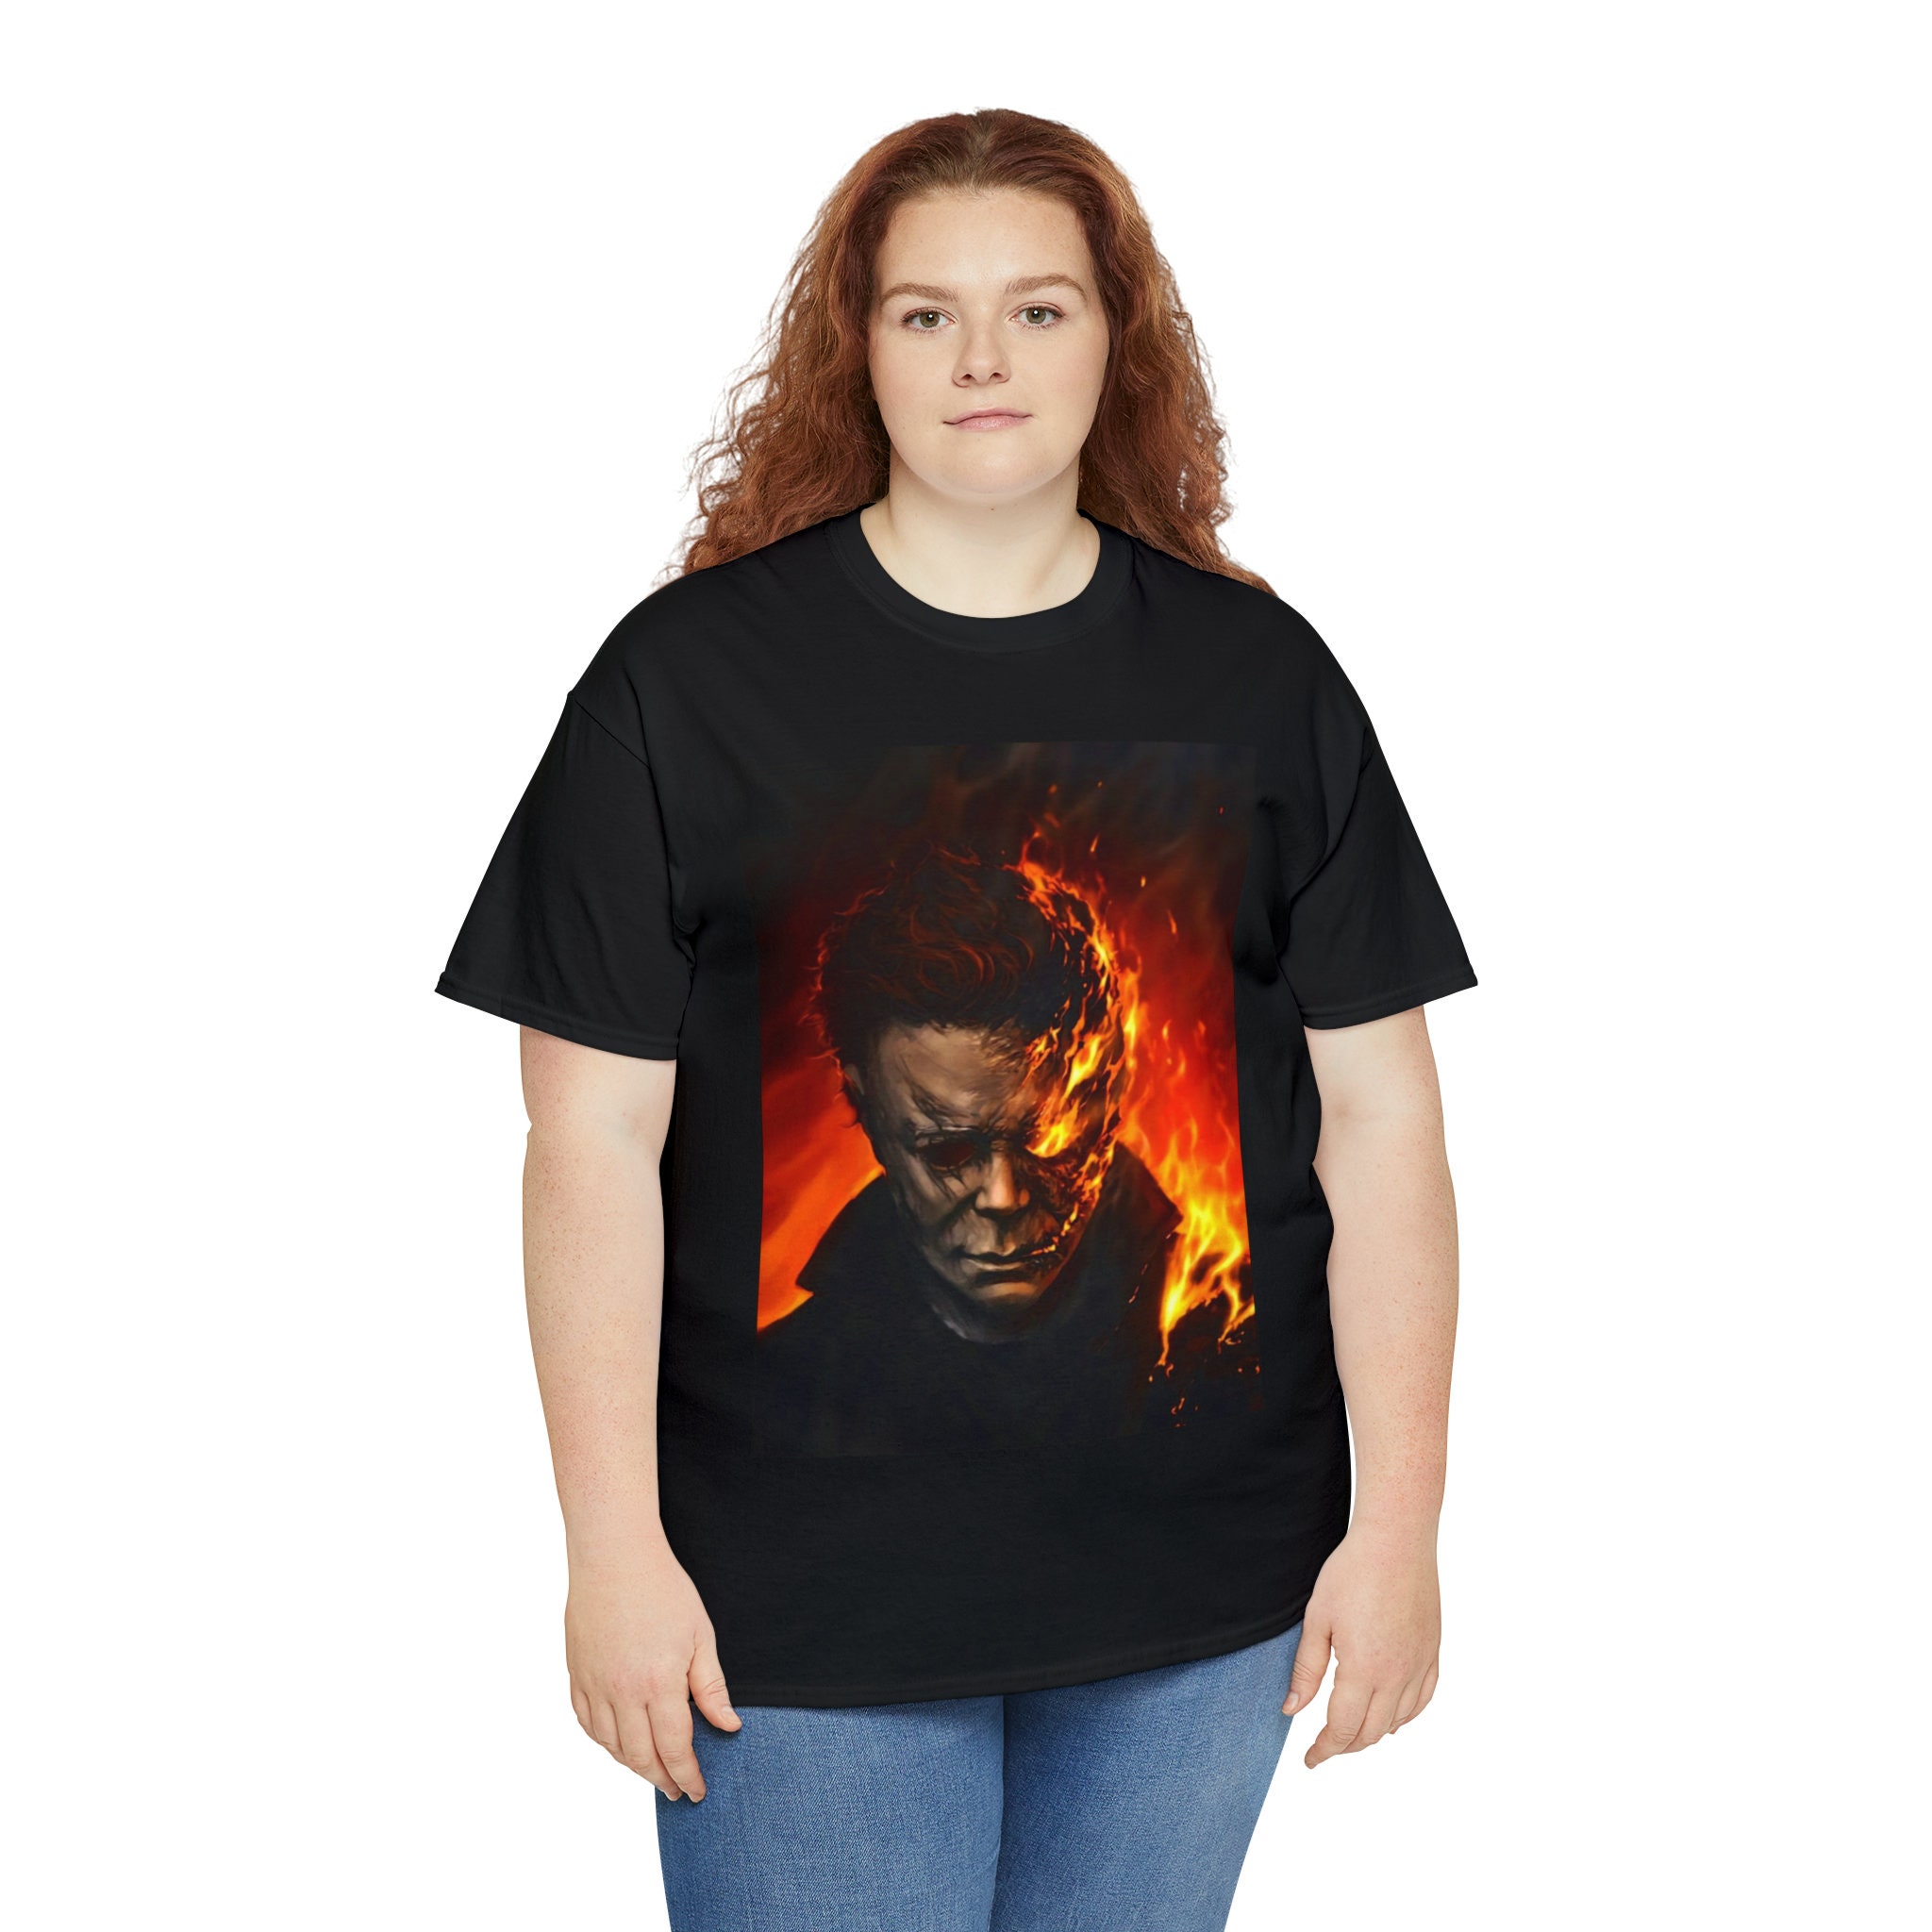 Discover Michael Myers Graphic Tee Creep into Style with our Horror Movie Graphic Tees: Spooky Shirts for Film Fanatics!